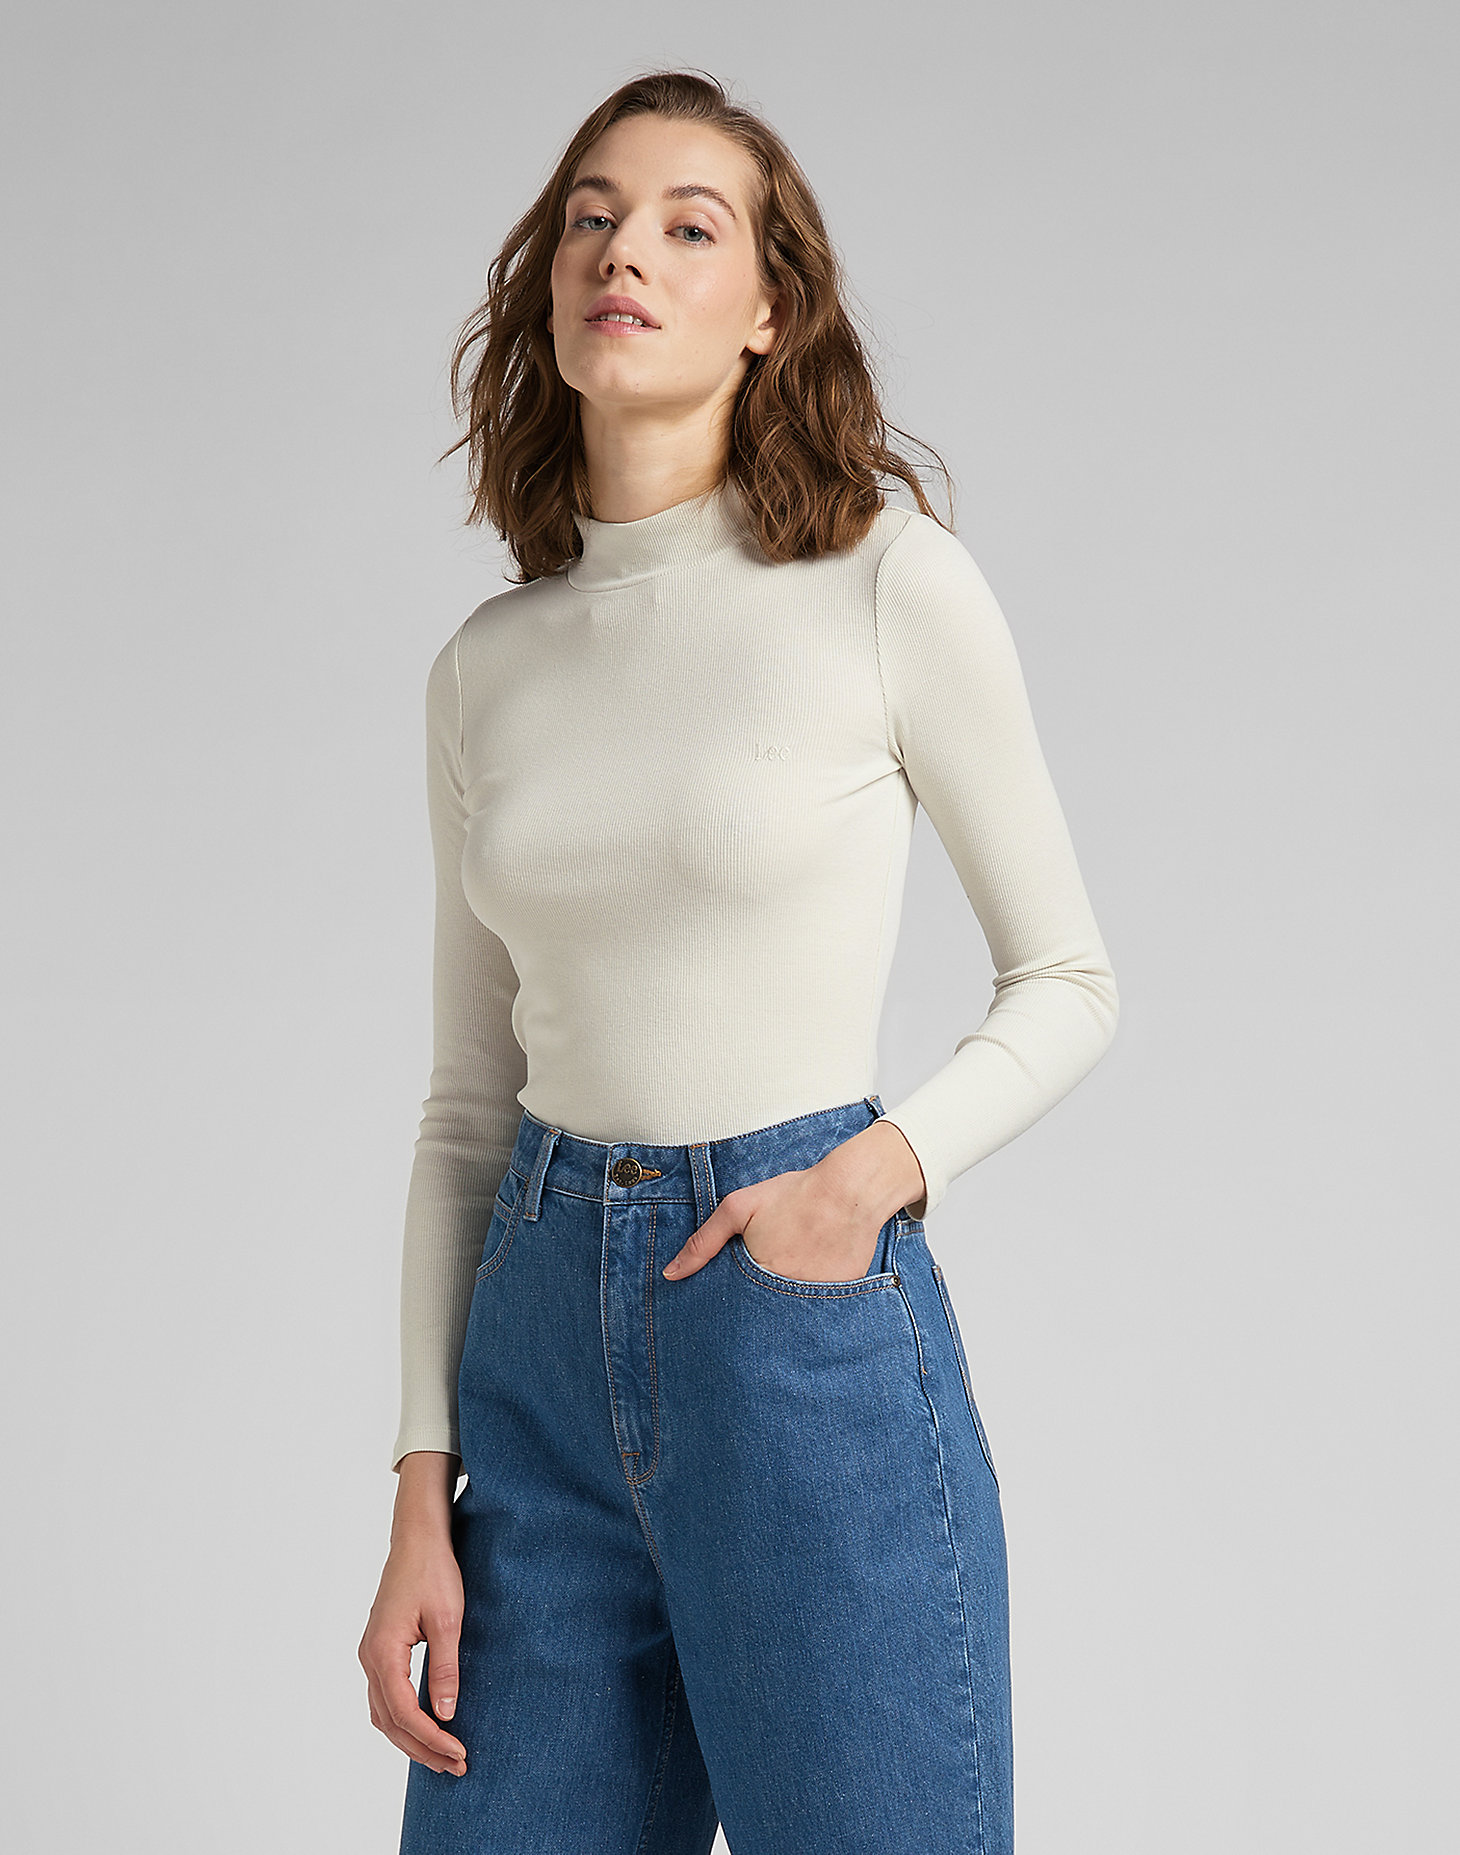 Ribbed Long Sleeve Tee in Workwear White main view